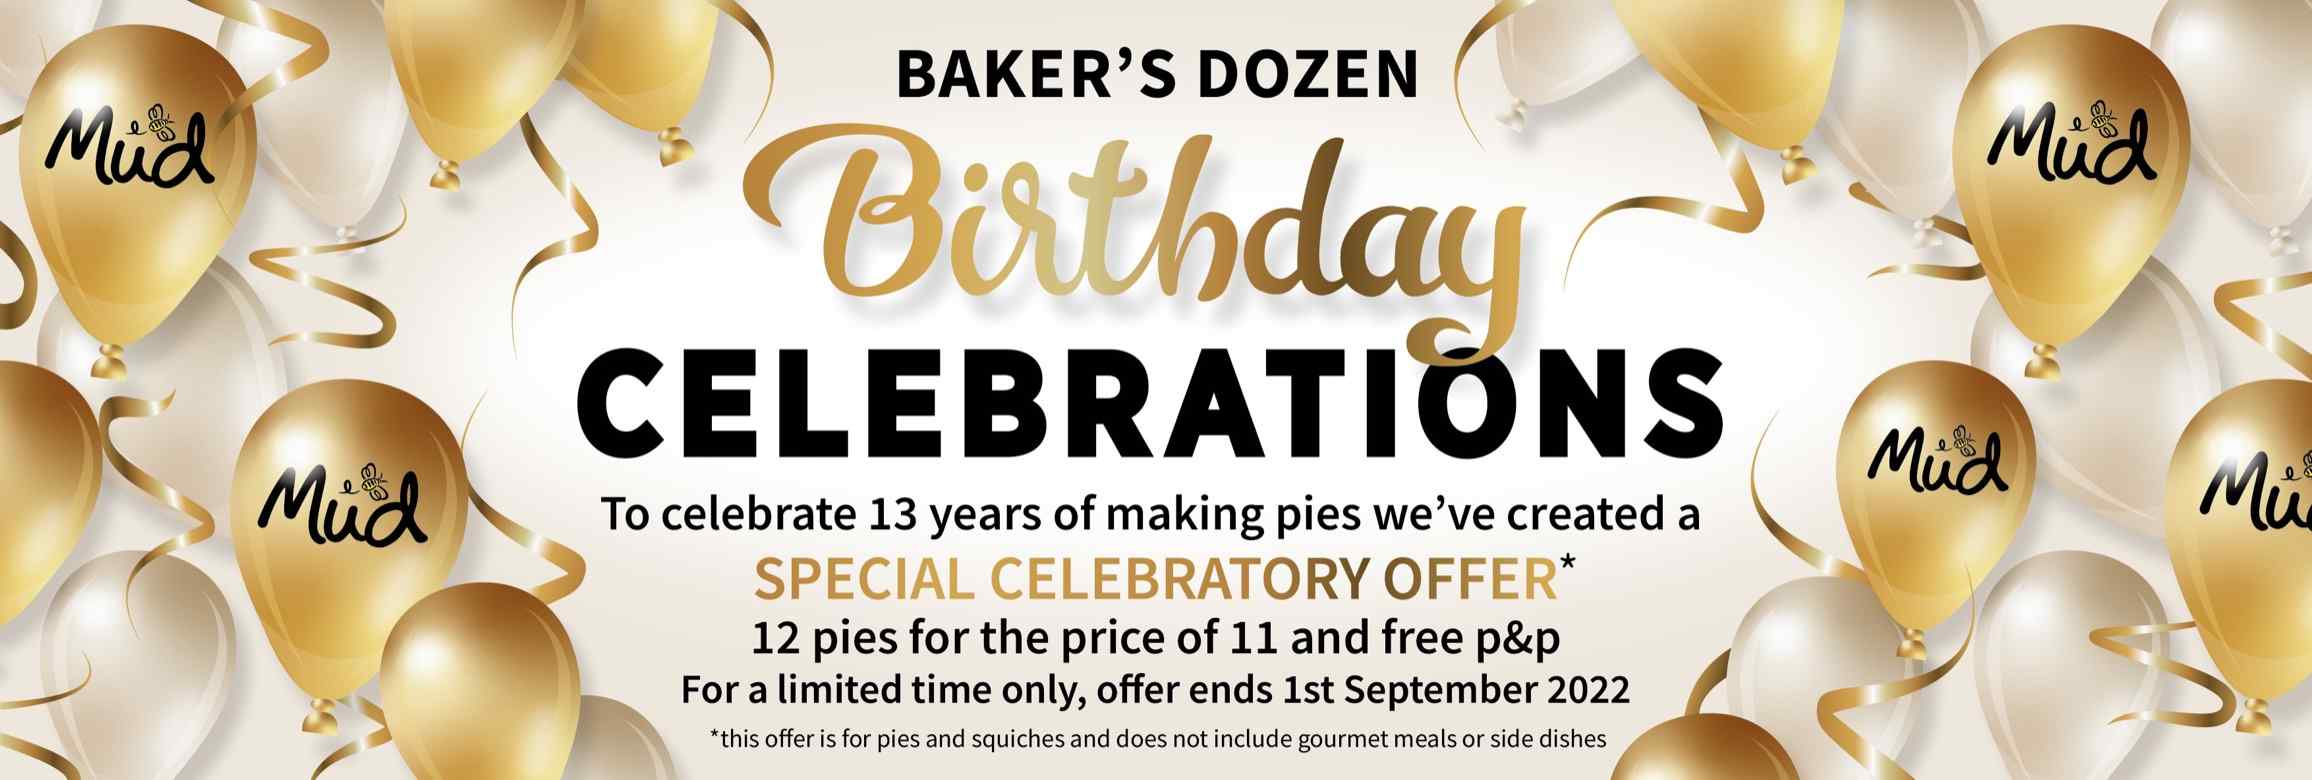 Bakers dozen 13th birthday celebratory offer, Buy 12 for the price of 11 and free delivery